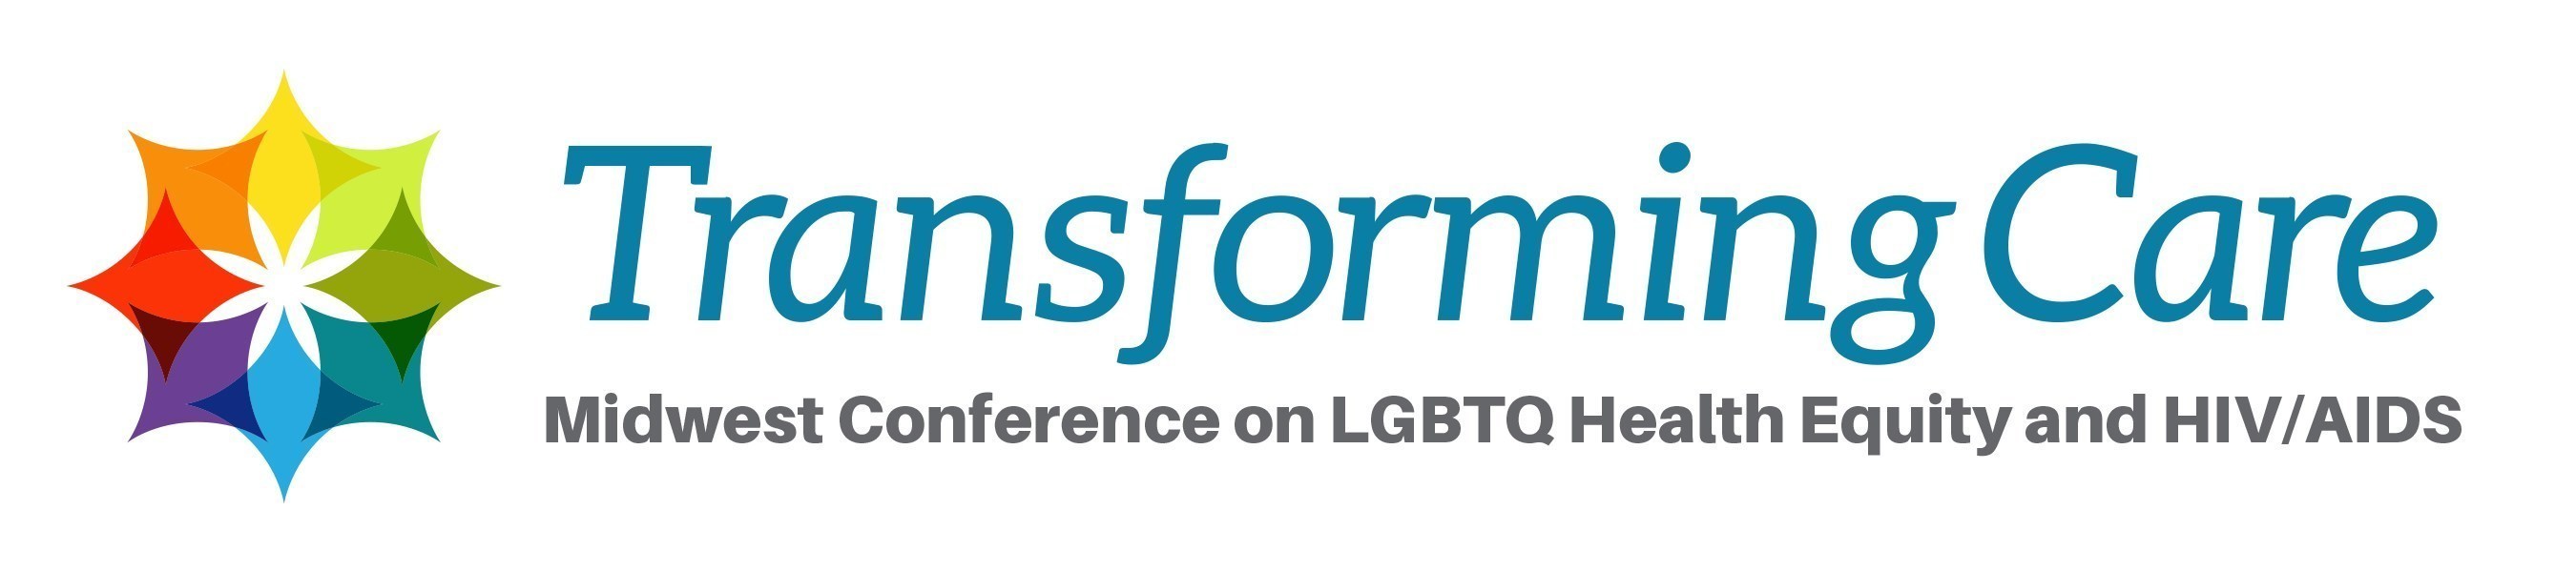 Transforming Care: Midwest Conference on LGBTQ Health Equity and HIV/AIDS brings together over 450 activists, academics, community members, health and social service professionals and others interested in reducing health disparities in the LGBTQ and HIV/AIDS community.